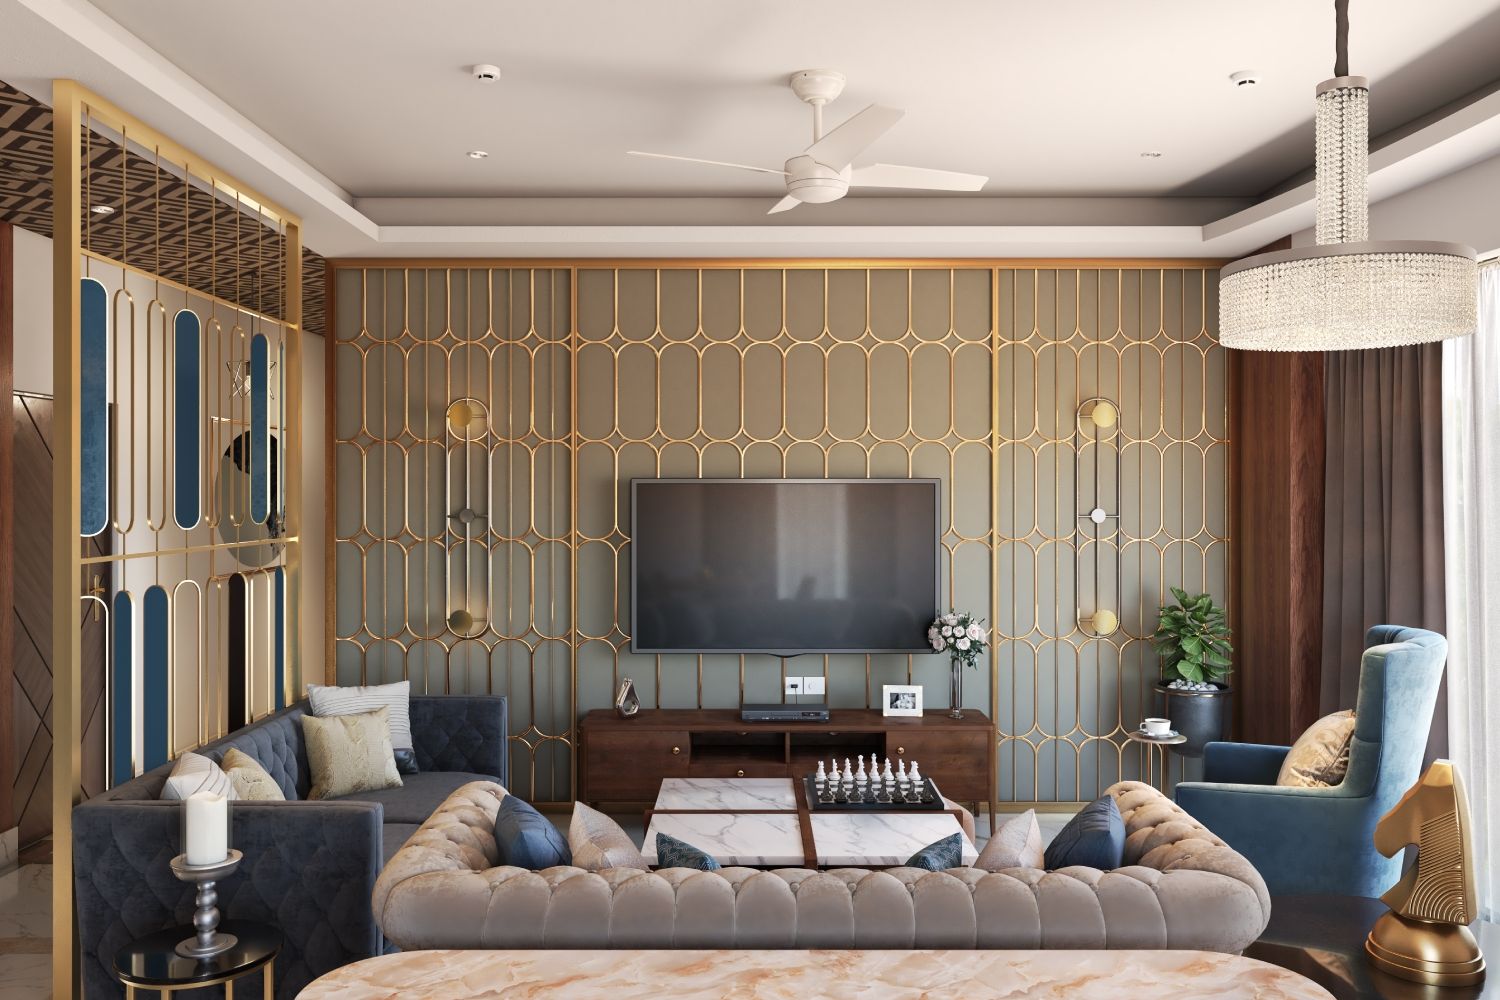 Contemporary Living Room Wall Design With Gold Oval-Shaped Inserts